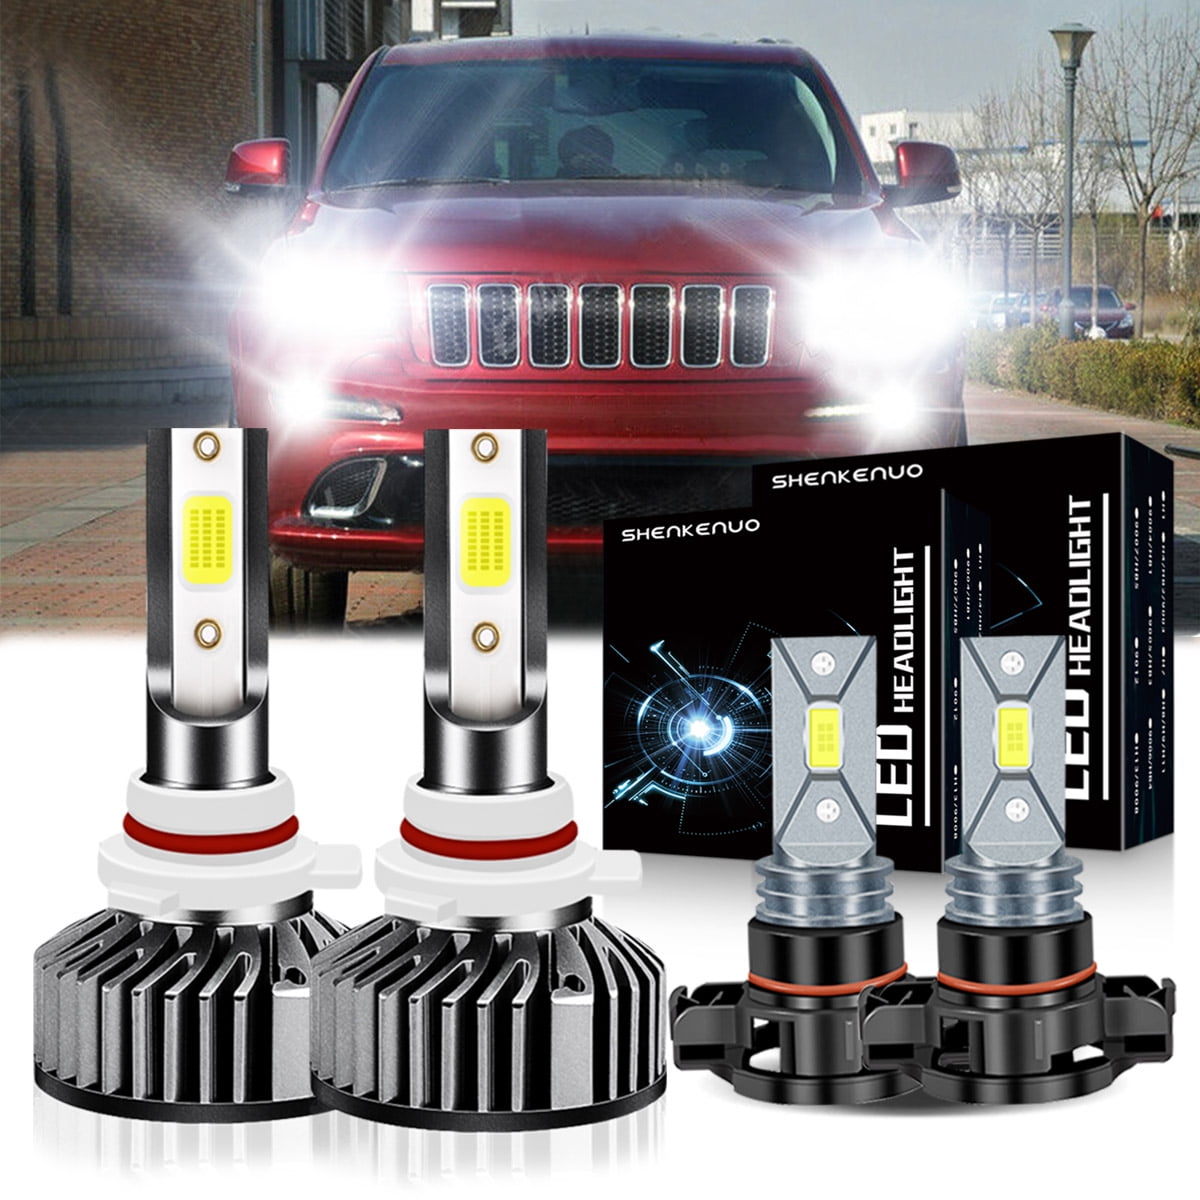 2pc New H16 5202 Projector White LED Fog Light Bulbs for Jeep Patriot 2007-2017 